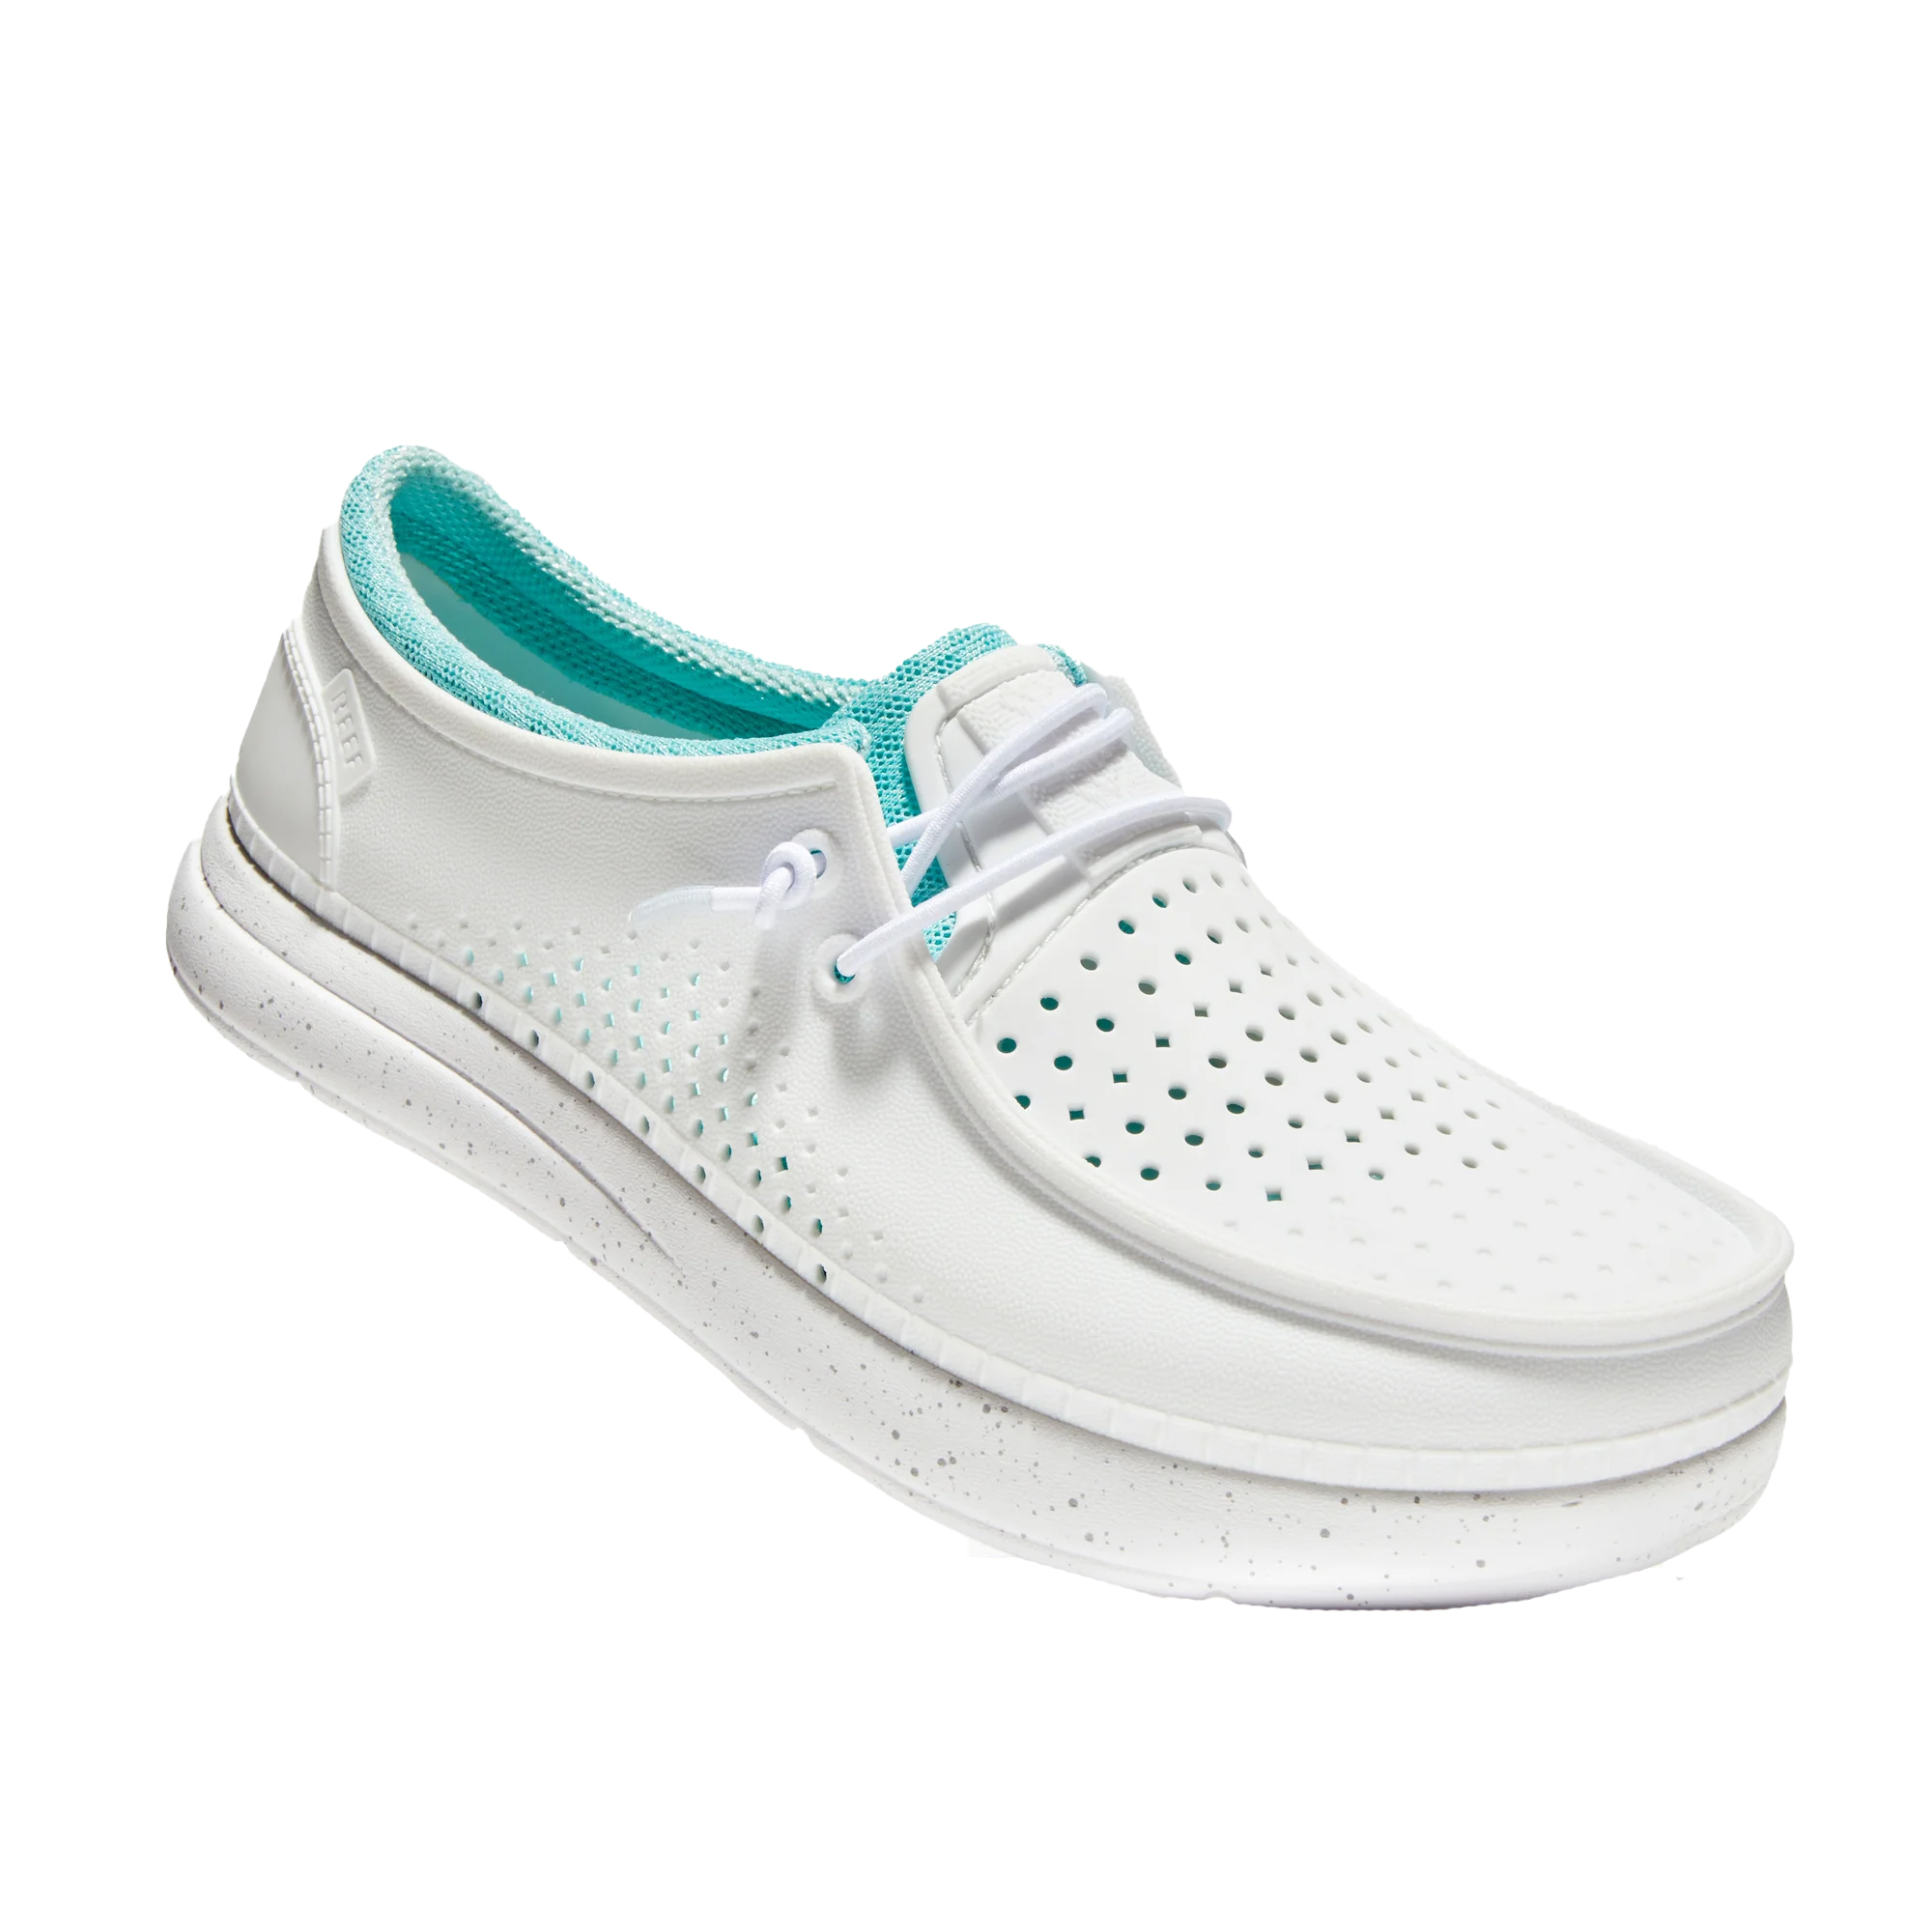 Reef Water Coast Shoes - Floating